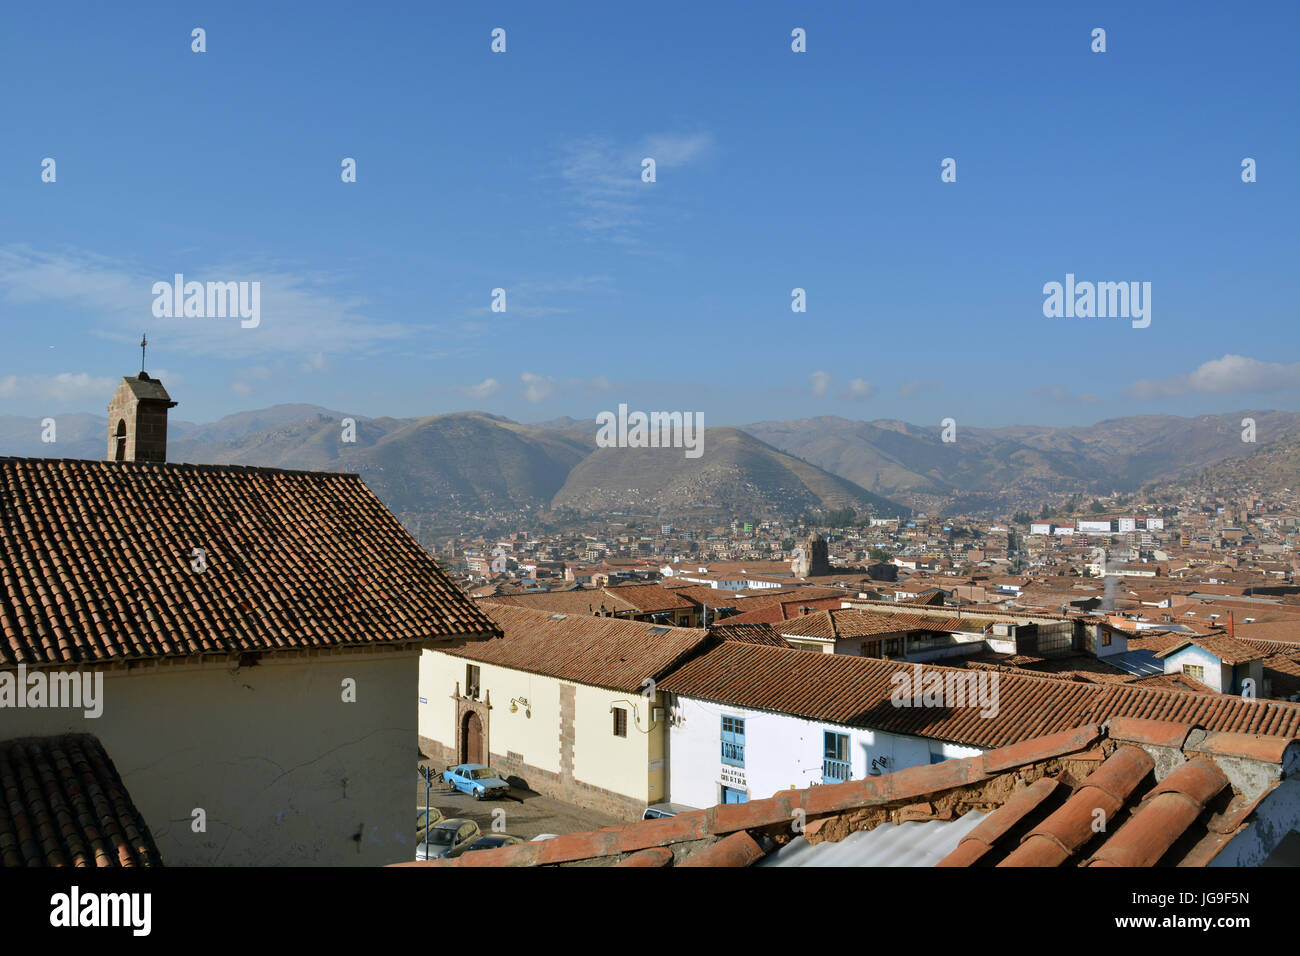 The tile roofs of Cusco Peru, a city of half a million, spread out across the valley floor. Stock Photo